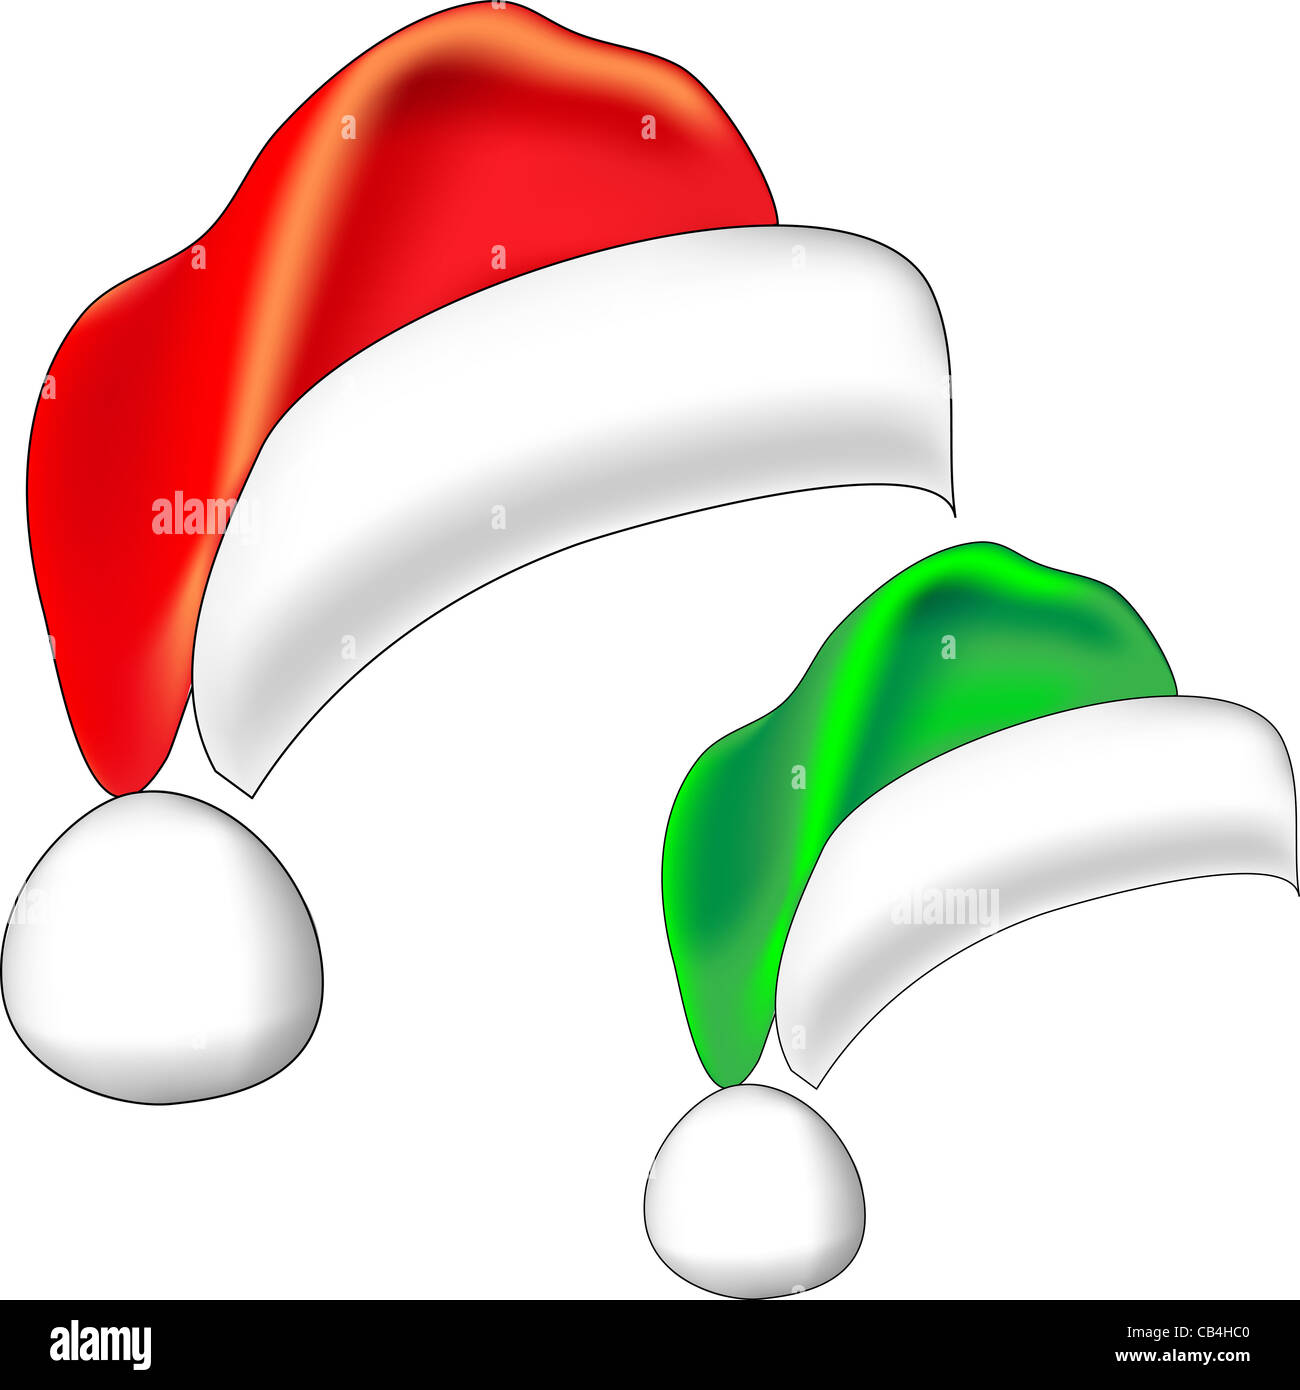 Christmas red Santa Claus hat and Christmas elf green bell isolated on white background Stock Photo